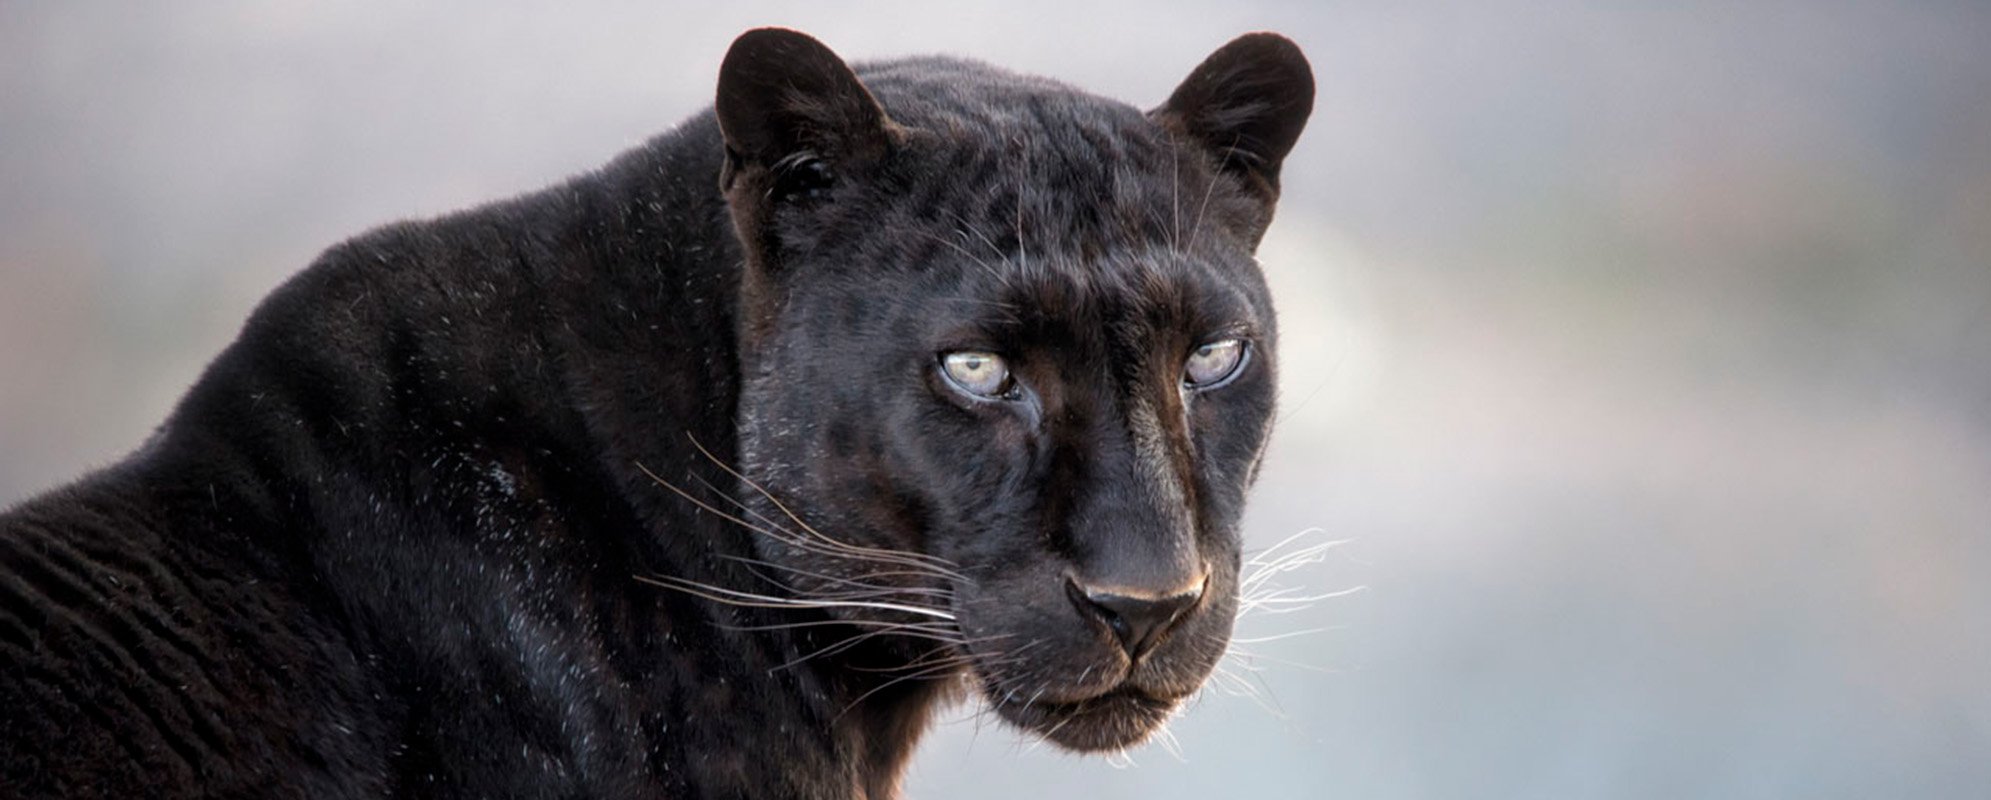 Jet-Black Leopards Have Spots That May Save Their Species